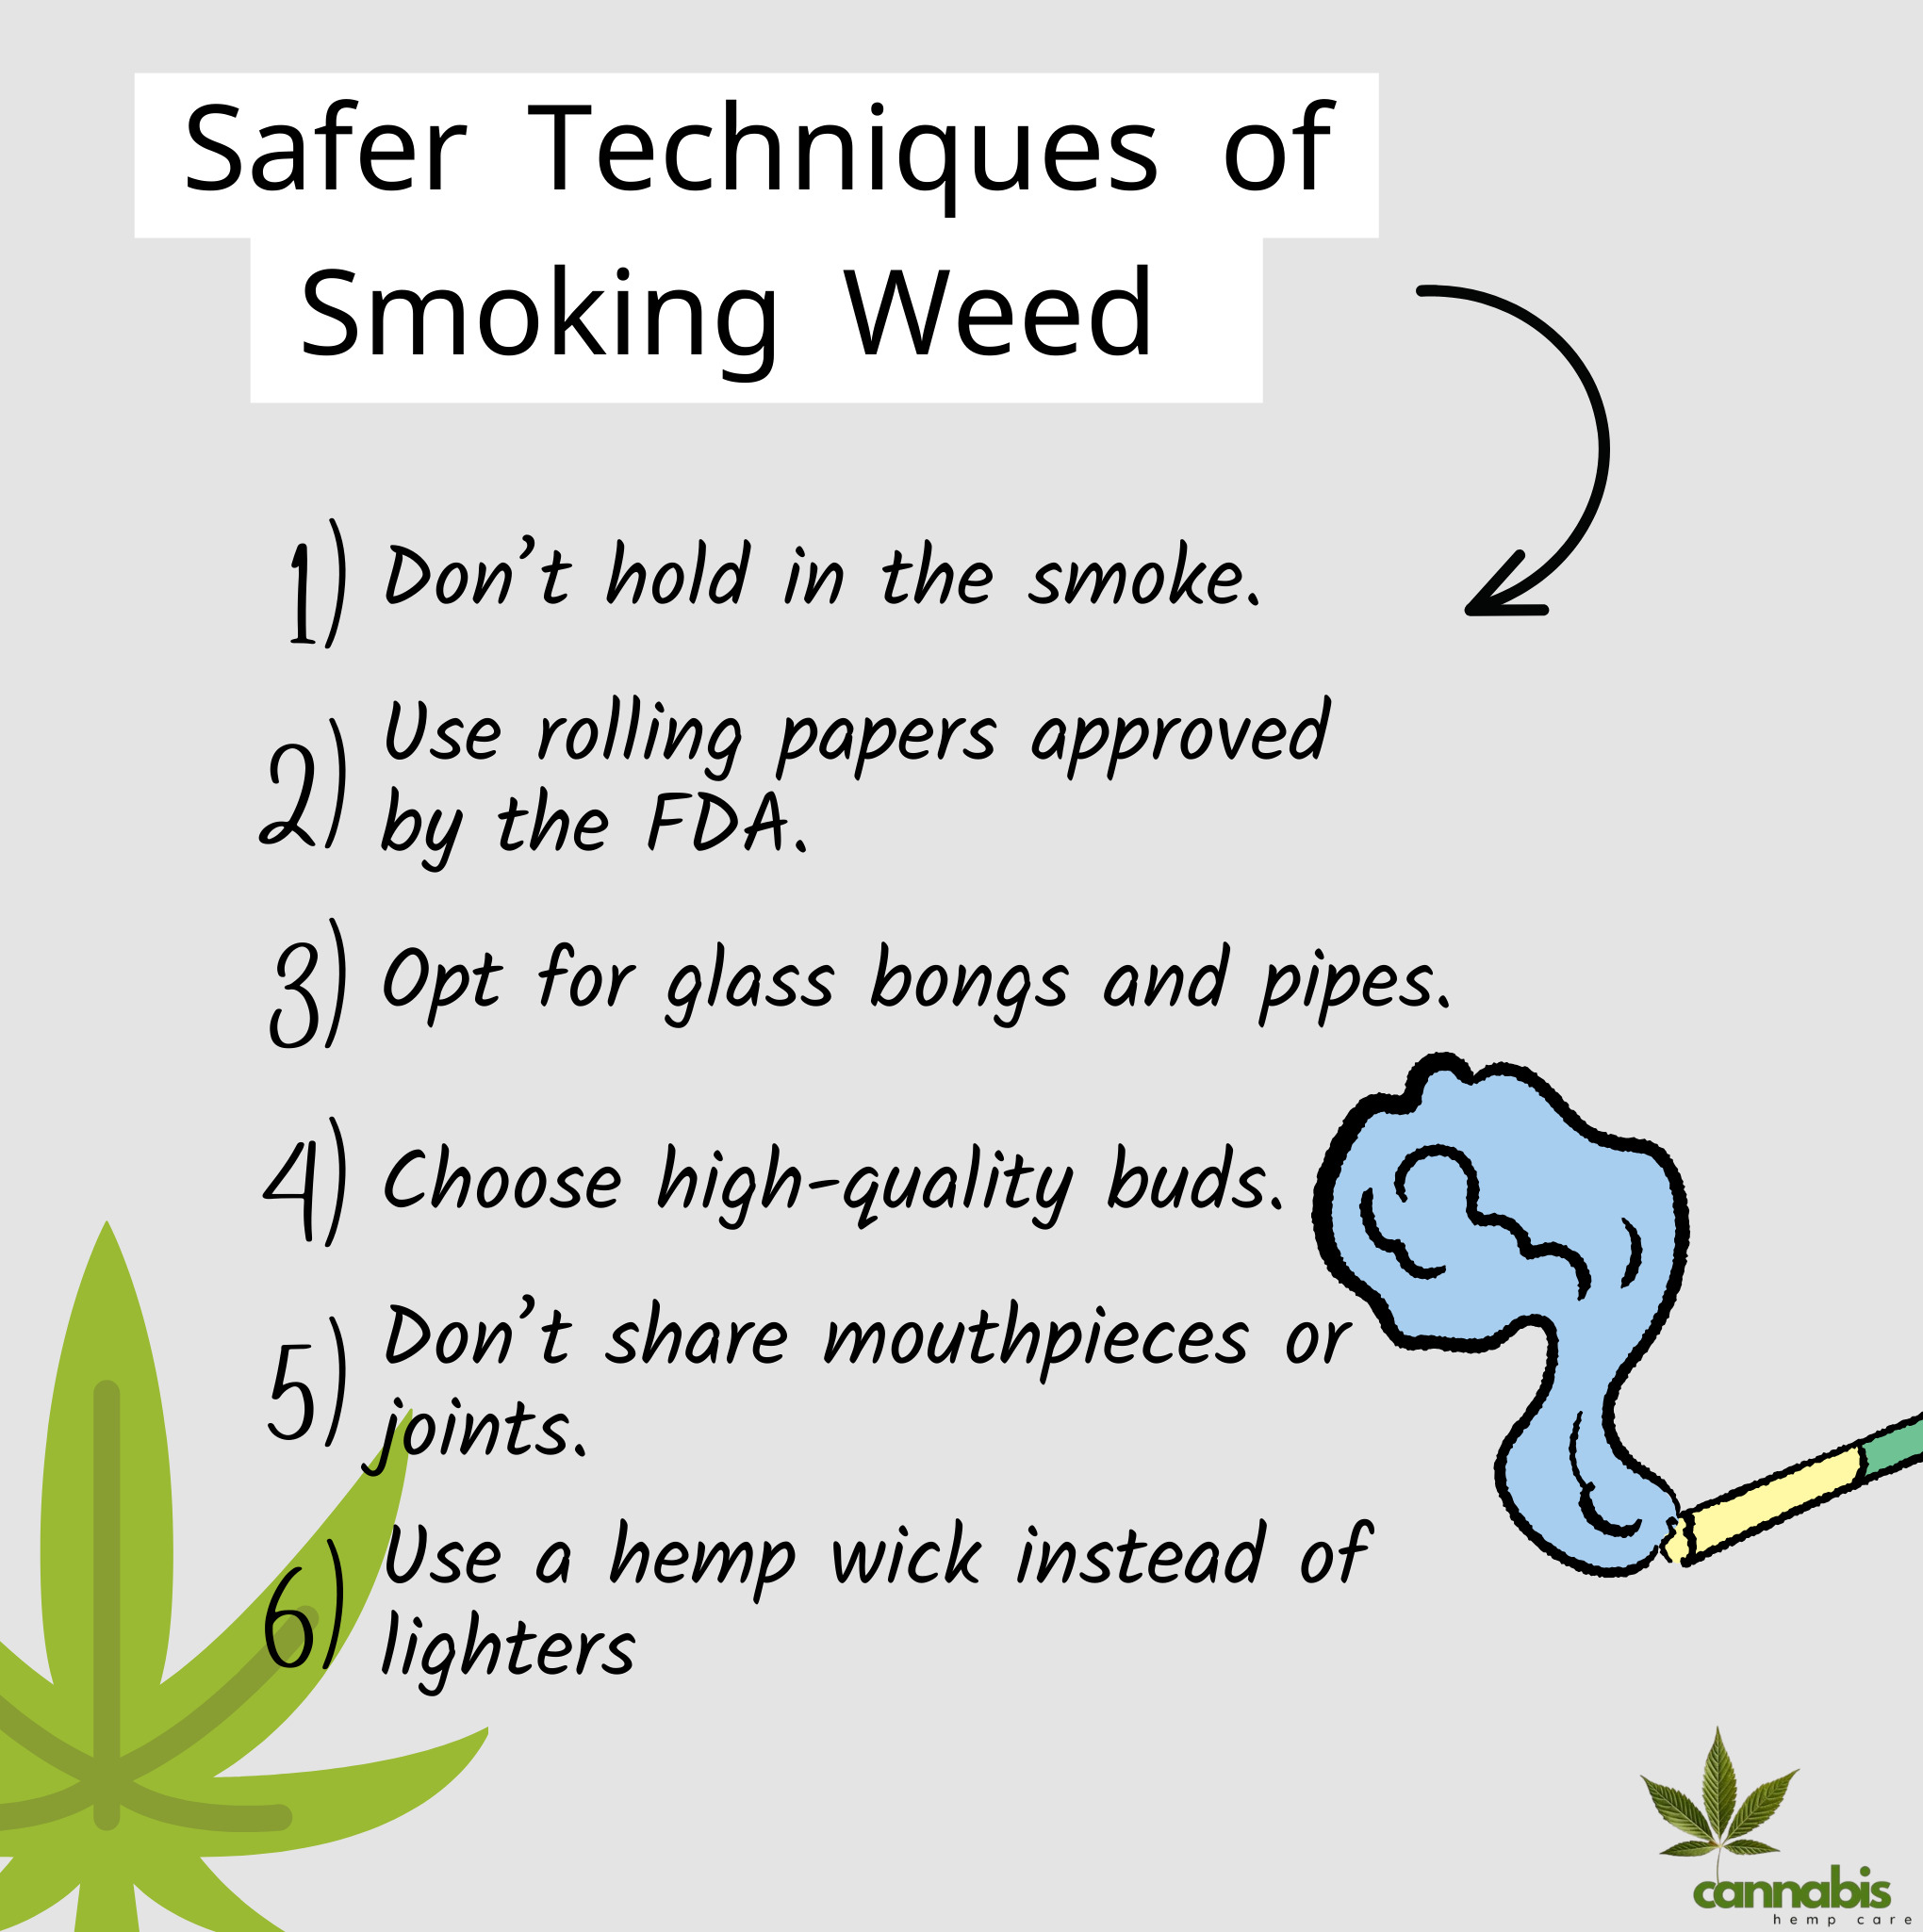 Safer Techniques of
Smoking Weed